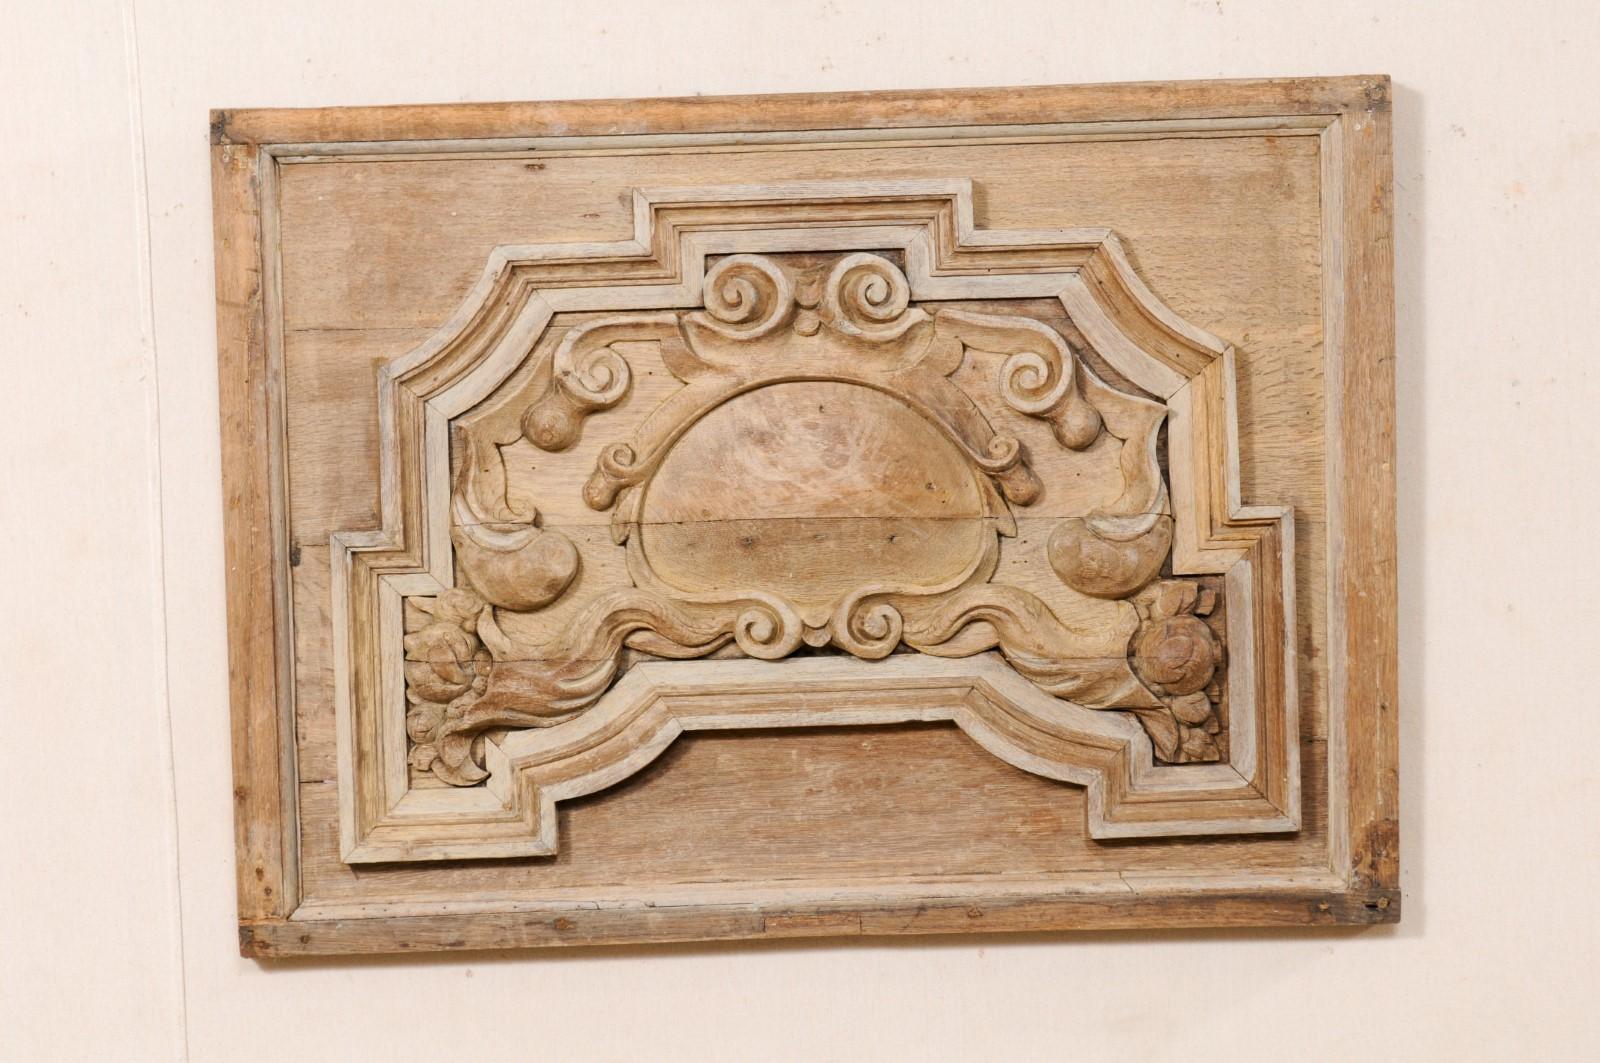 An Italian hand-carved wooden wall plaque from the 19th century. This antique wall decoration from Italy has a rectangular-shape, and features a motif of carved volutes, flowers, and central shell, framed within a simple molded surround. The